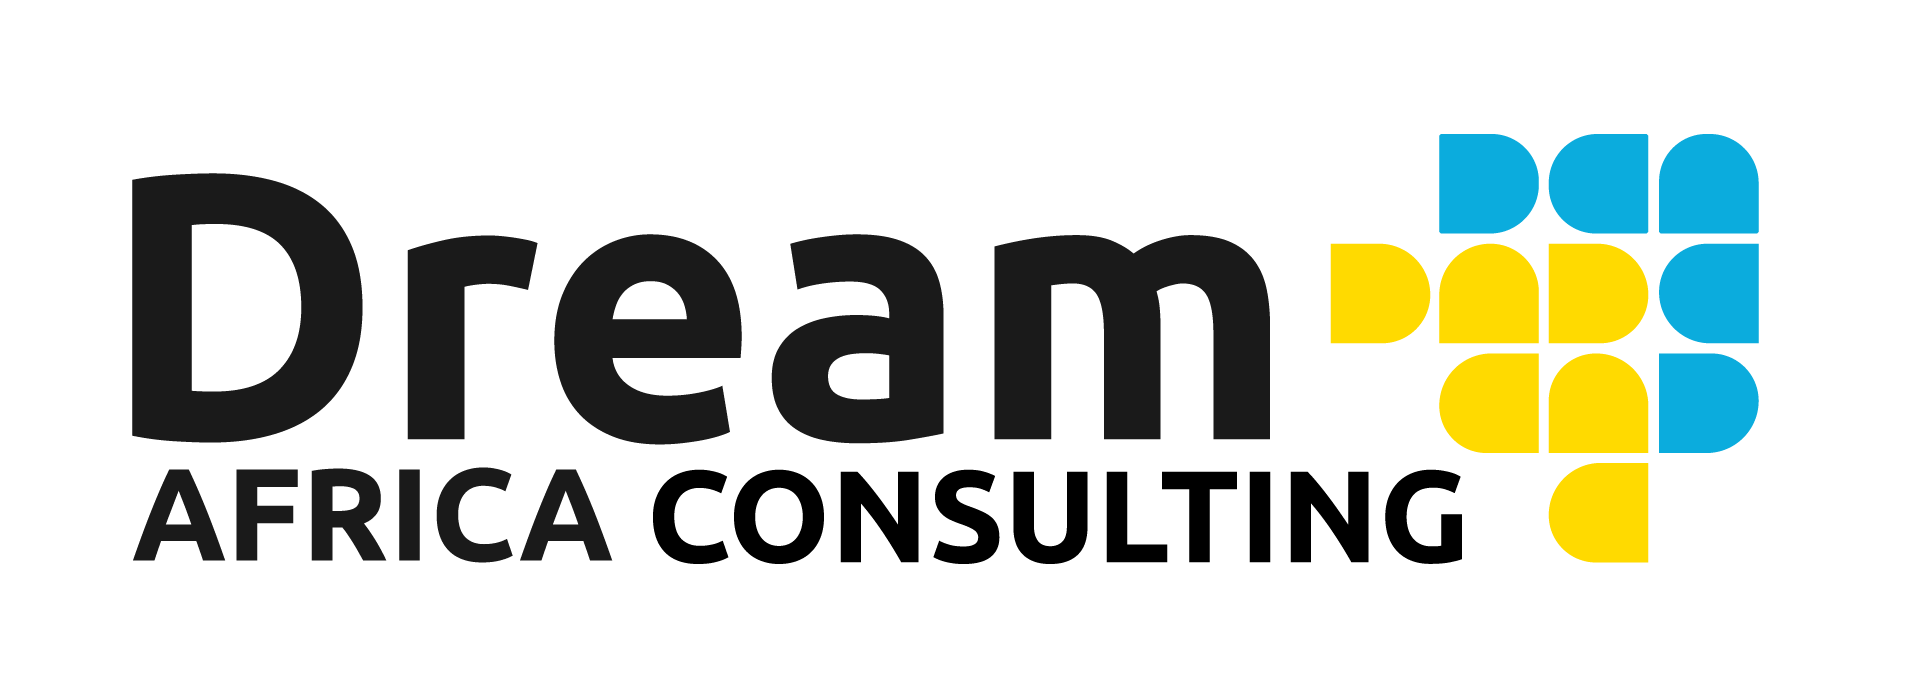 DREAM AFRICAN CONSULTING Logo